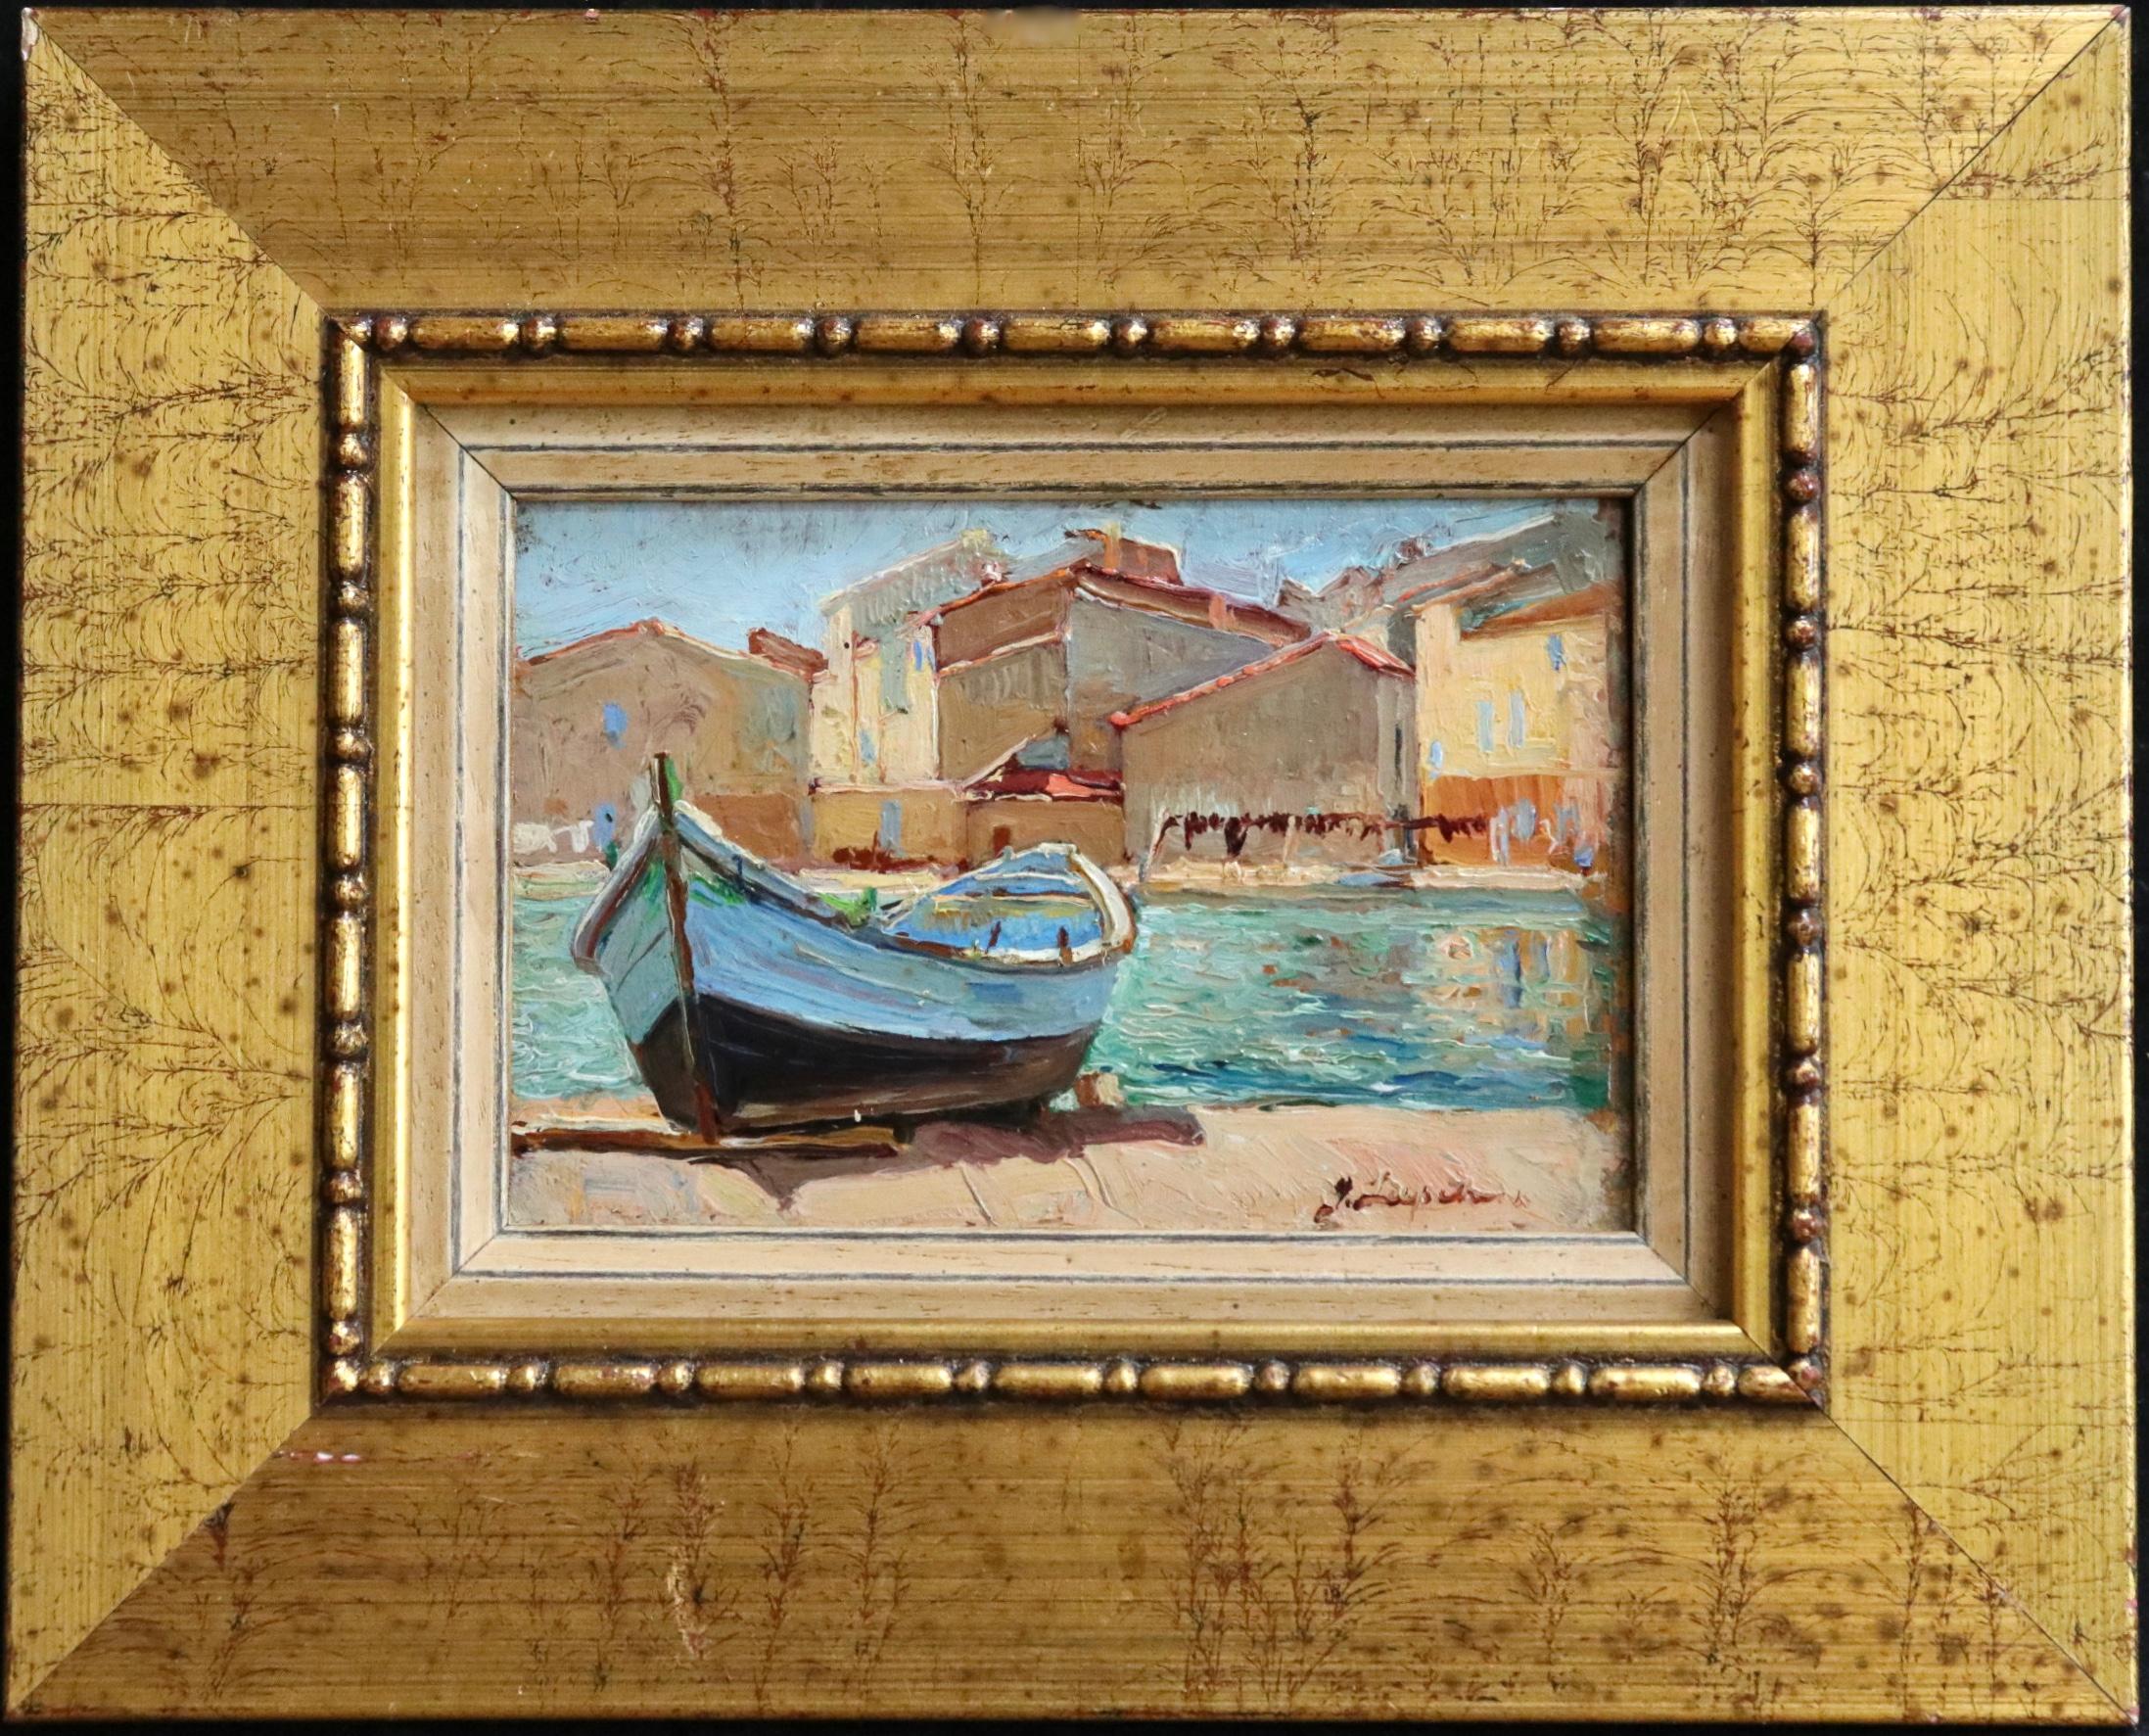 A colourful oil on board circa 1920 by Russian painter Georges Lapchine depicting the canal at Martigues in the south of France on a sunny day. There is a small boat to the foreground and houses beyond. Signed lower right. Framed dimensions are 9